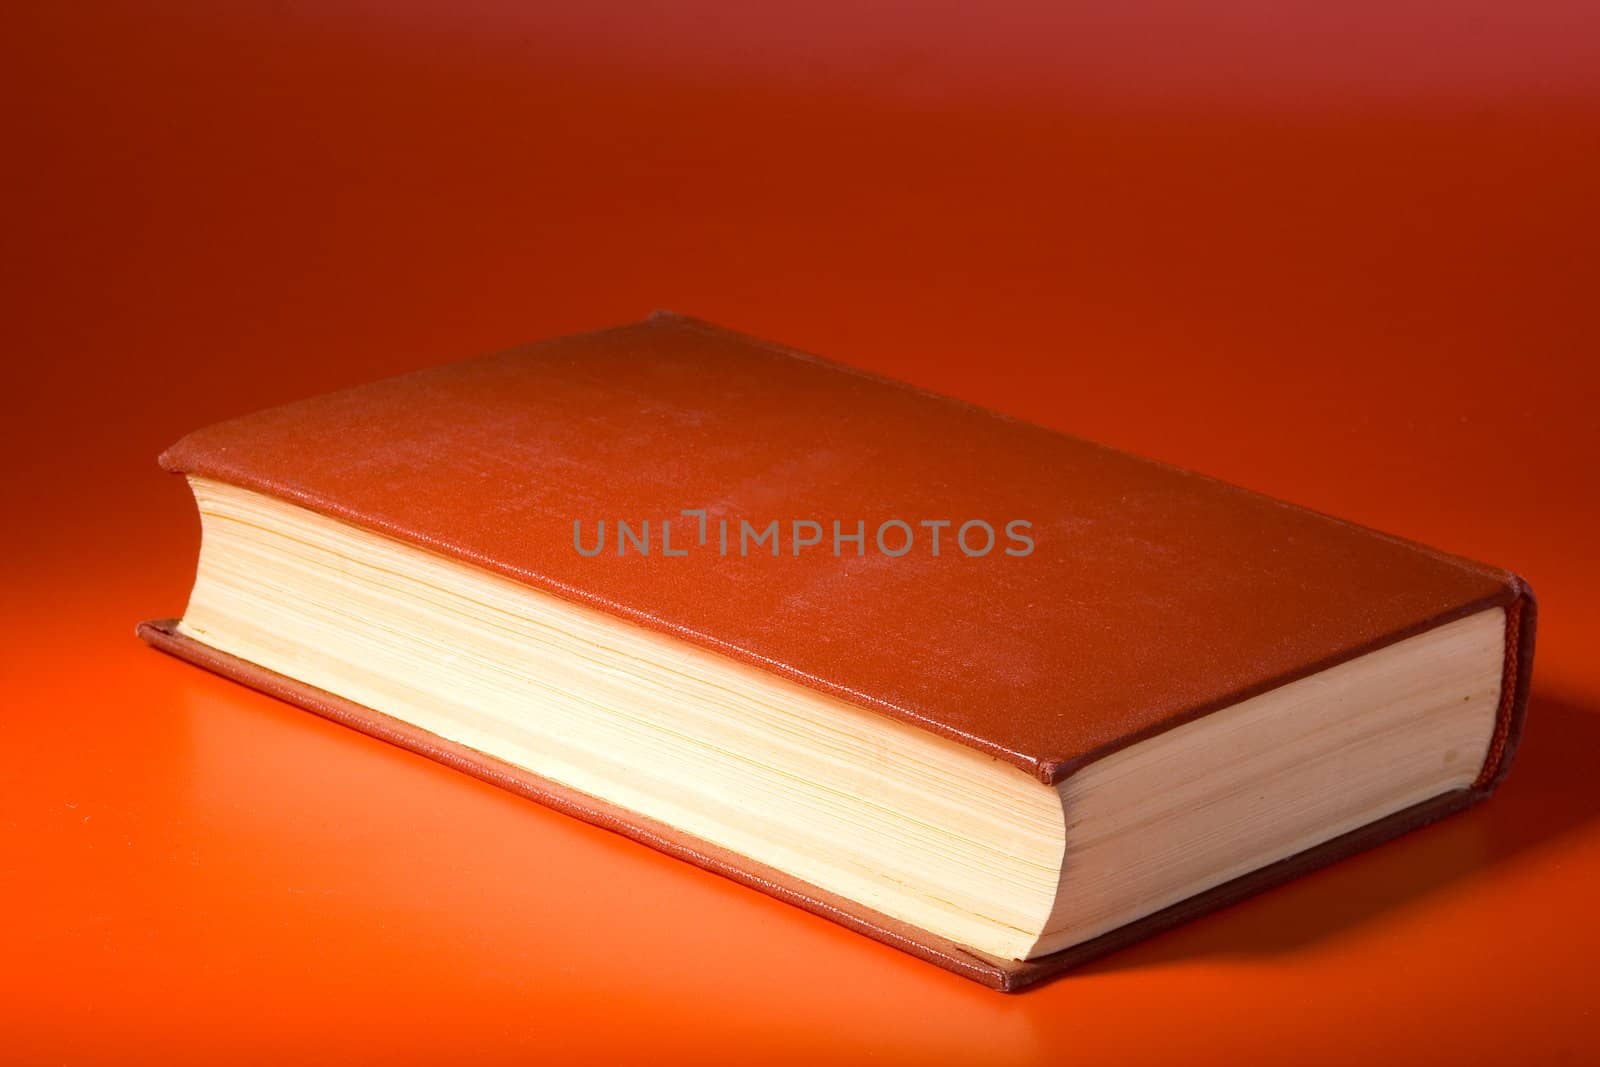 The Red Book by Vladimir